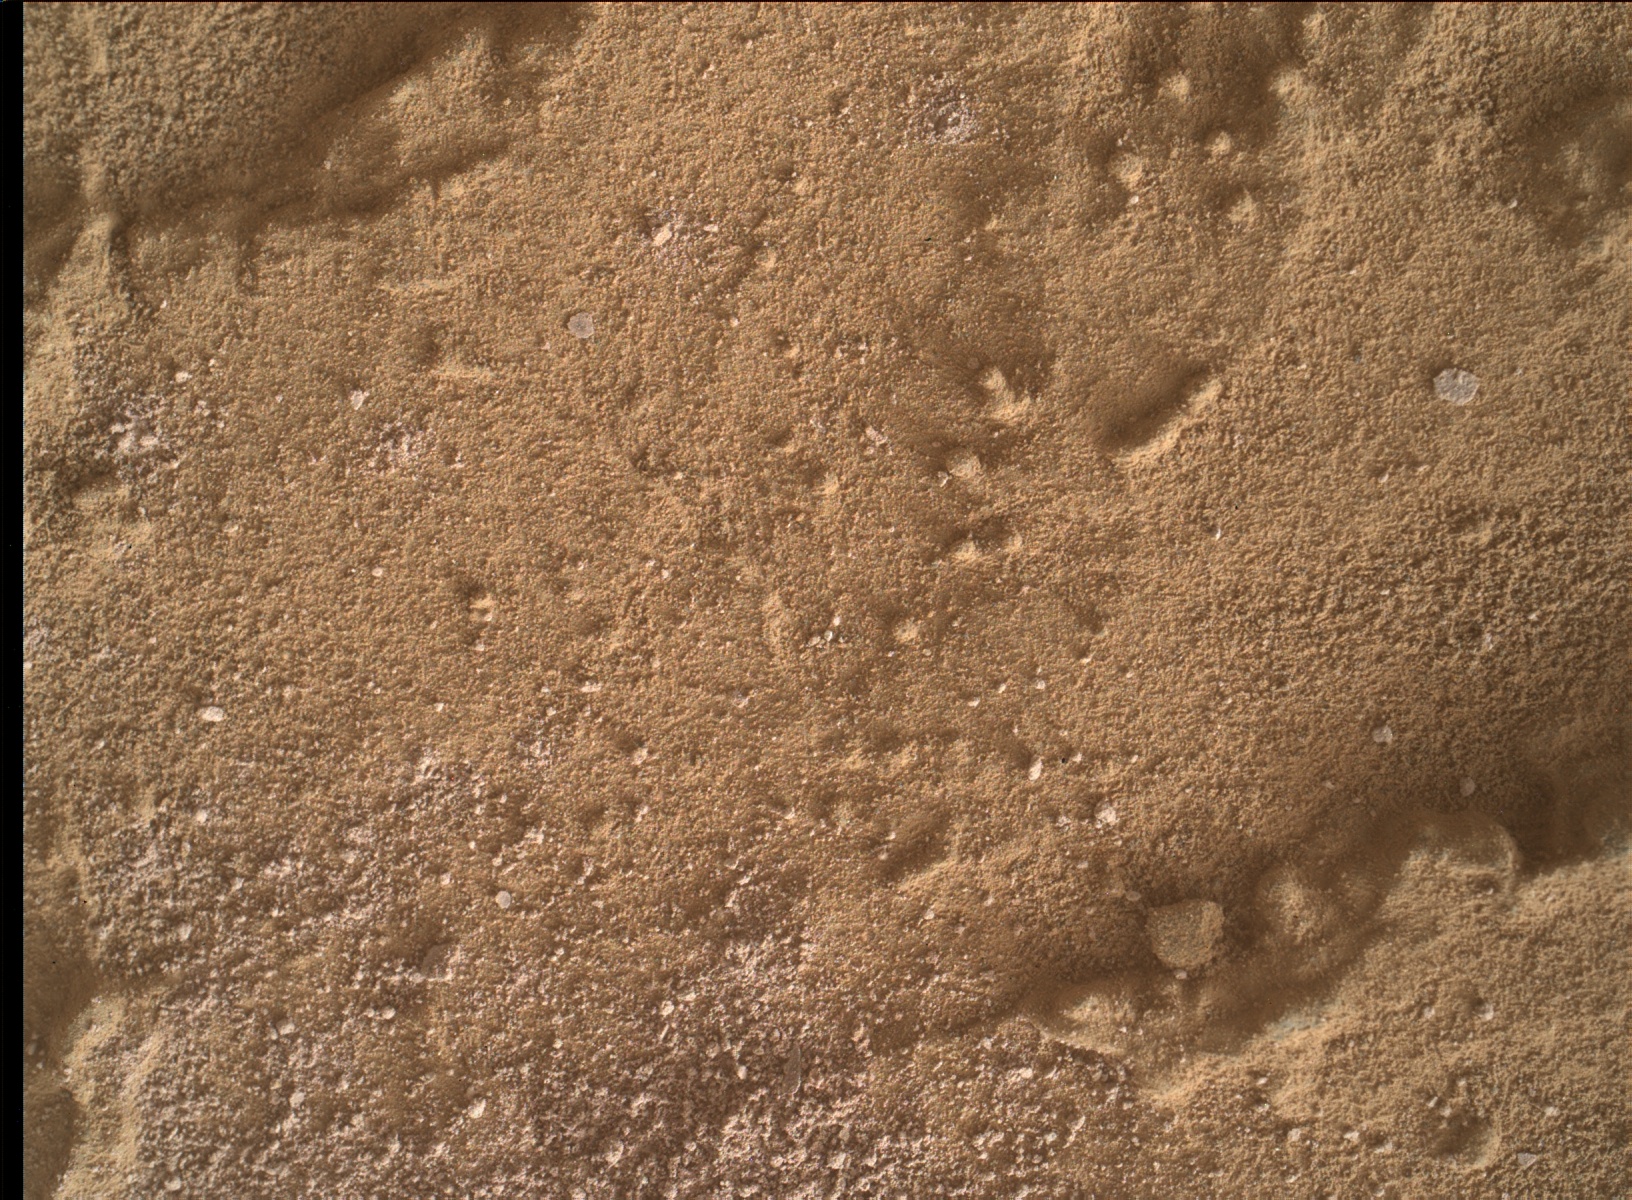 Nasa's Mars rover Curiosity acquired this image using its Mars Hand Lens Imager (MAHLI) on Sol 3102